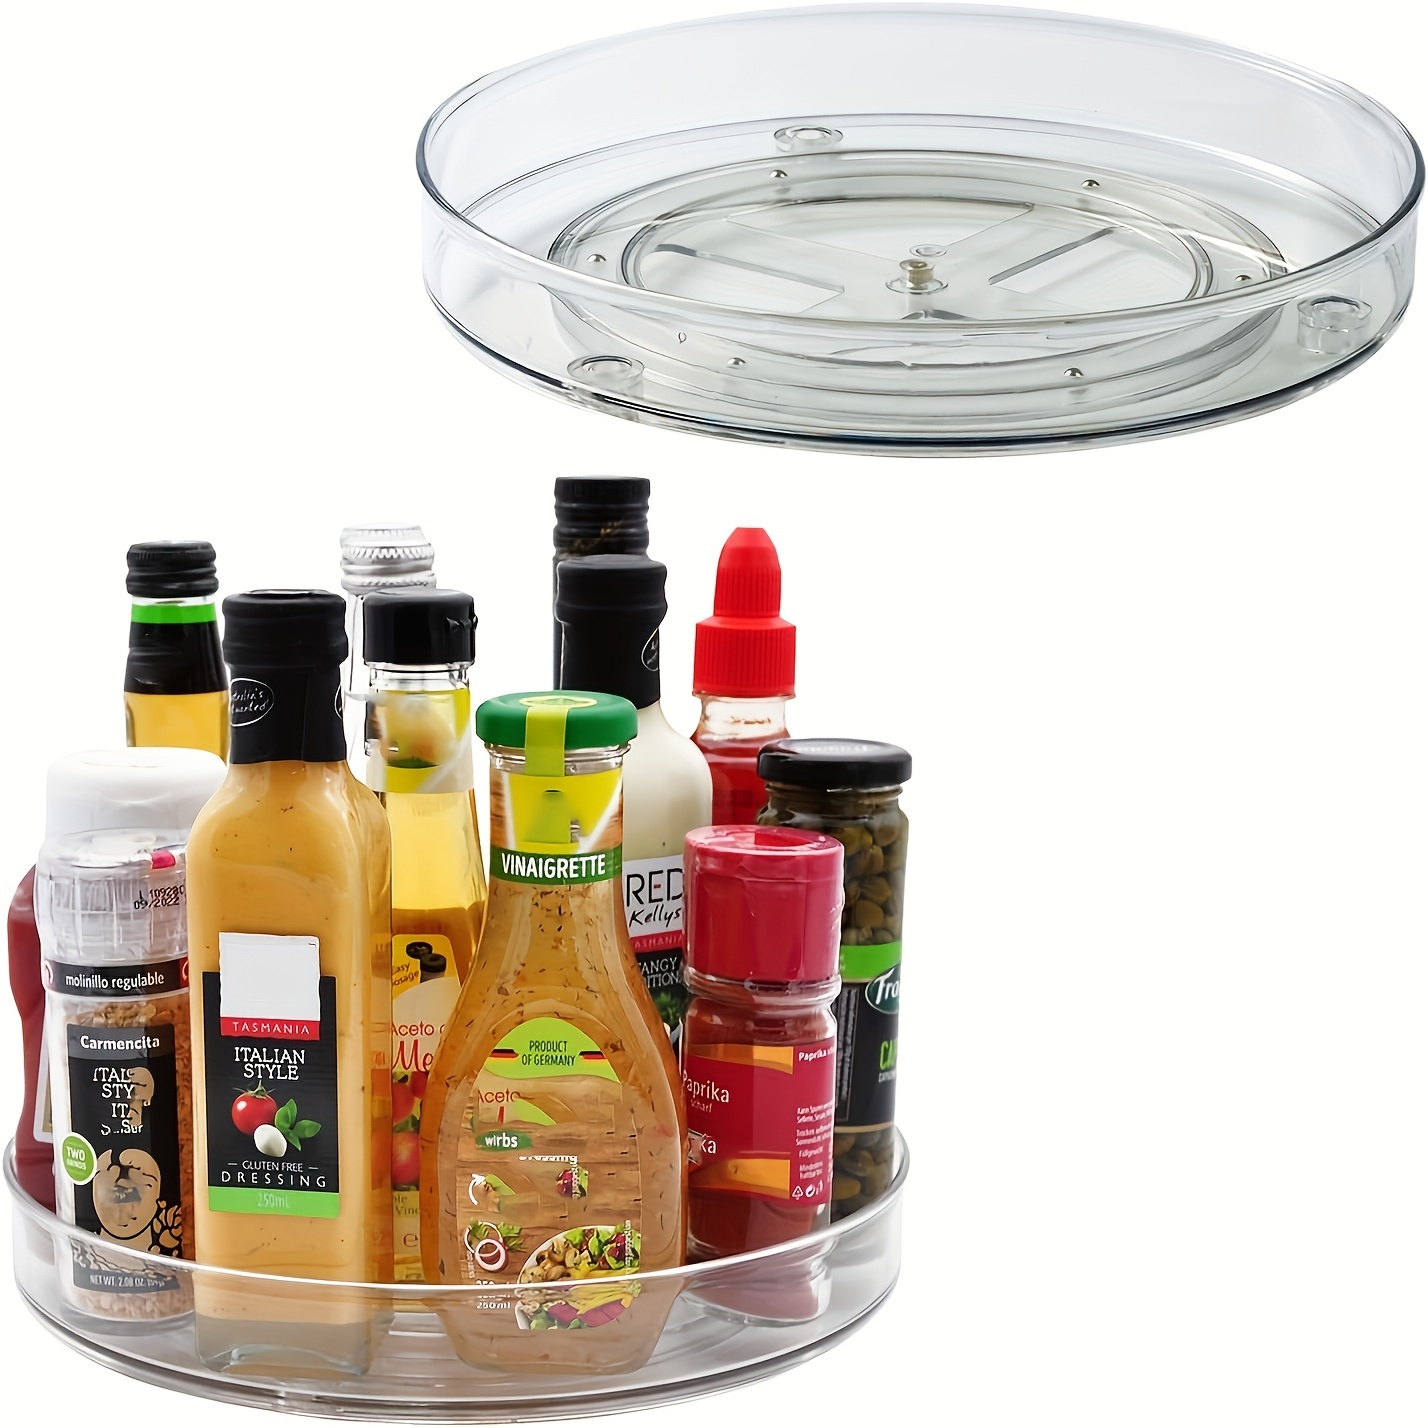 

1pc Clear Plastic Lazy Susan, Rotating Organizer For Kitchen Countertop, Refrigerator Storage, Bathroom Vanity, Multi-purpose Turntable Tray With Smooth Spinning Mechanism